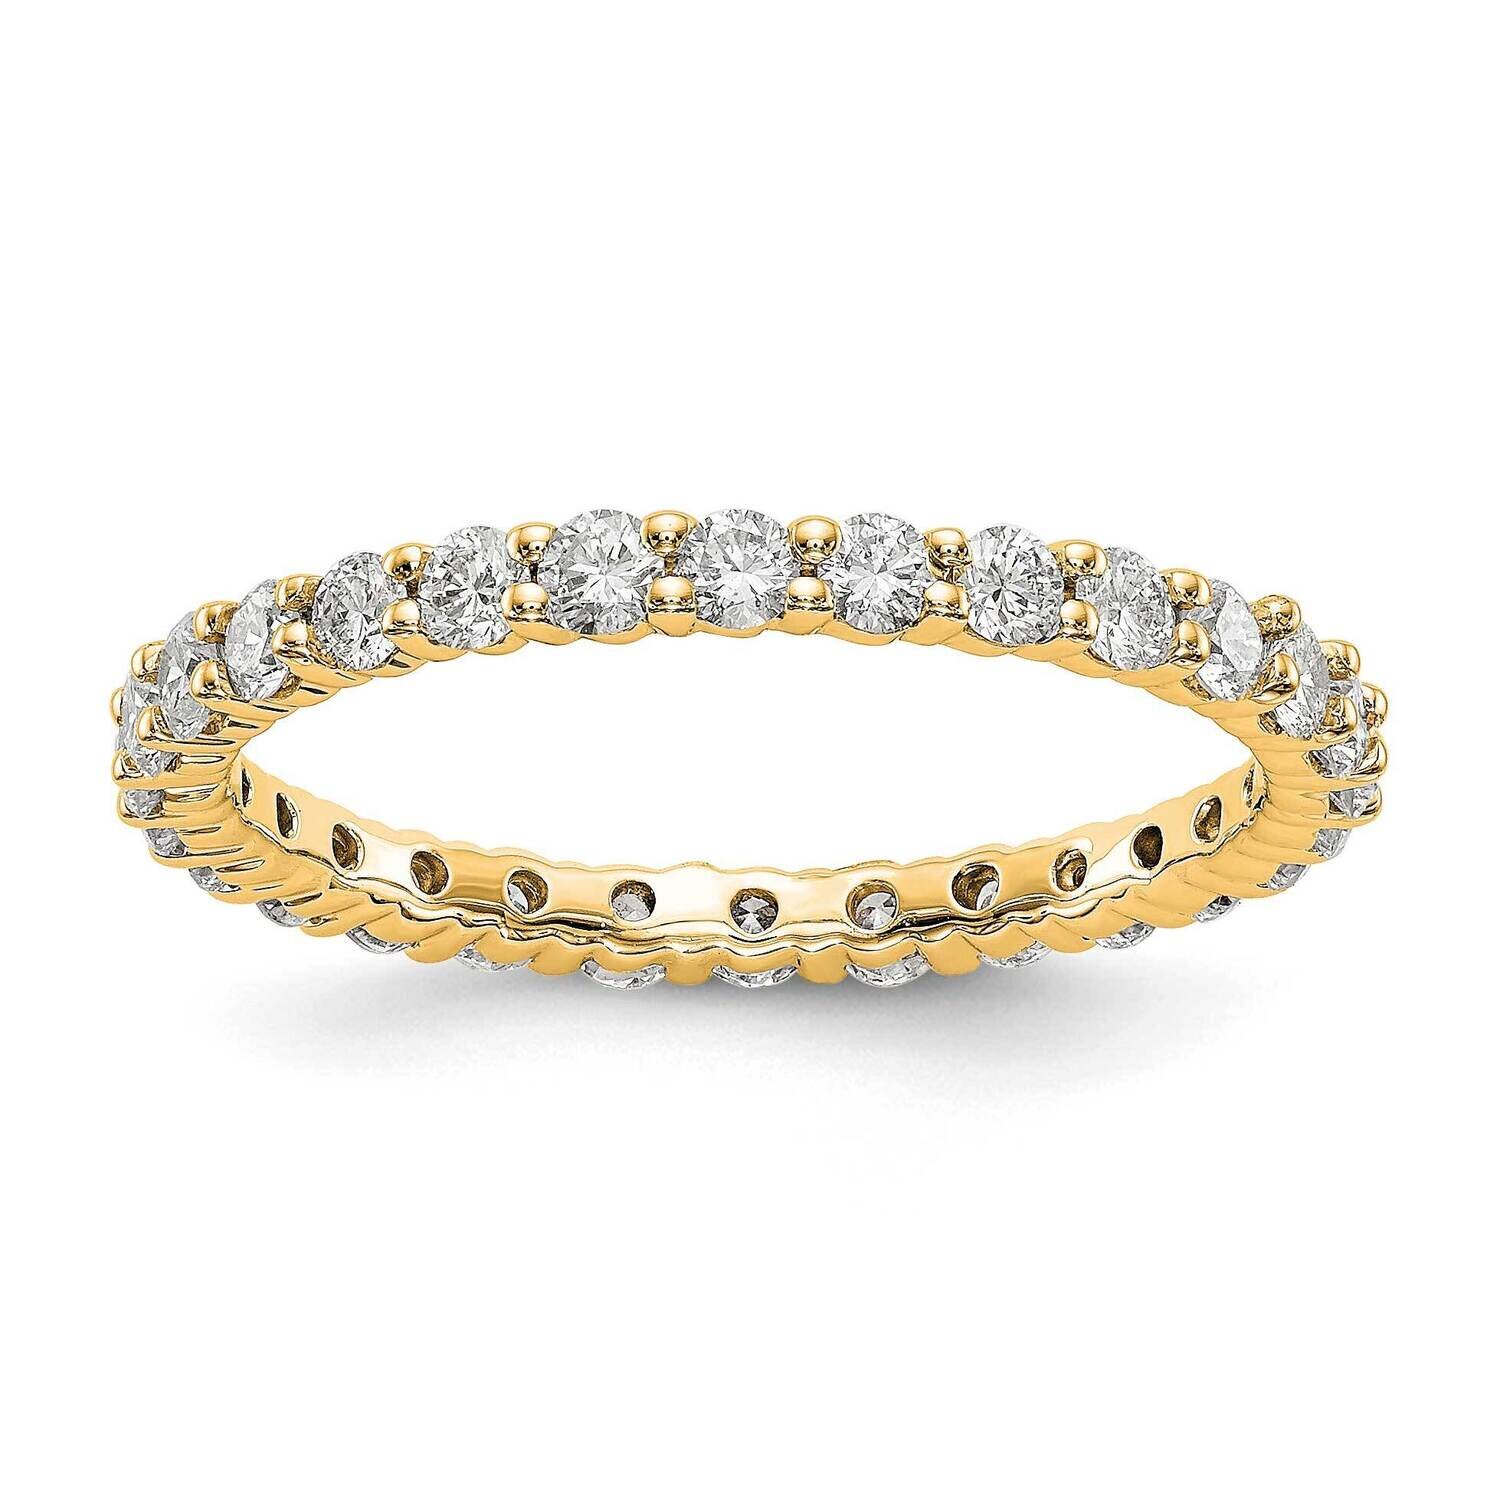 SI1/SI2 G H I Shared Prong Eternity Band 14k Yellow Gold Lab Grown Diamond ET0001-100-8YLG